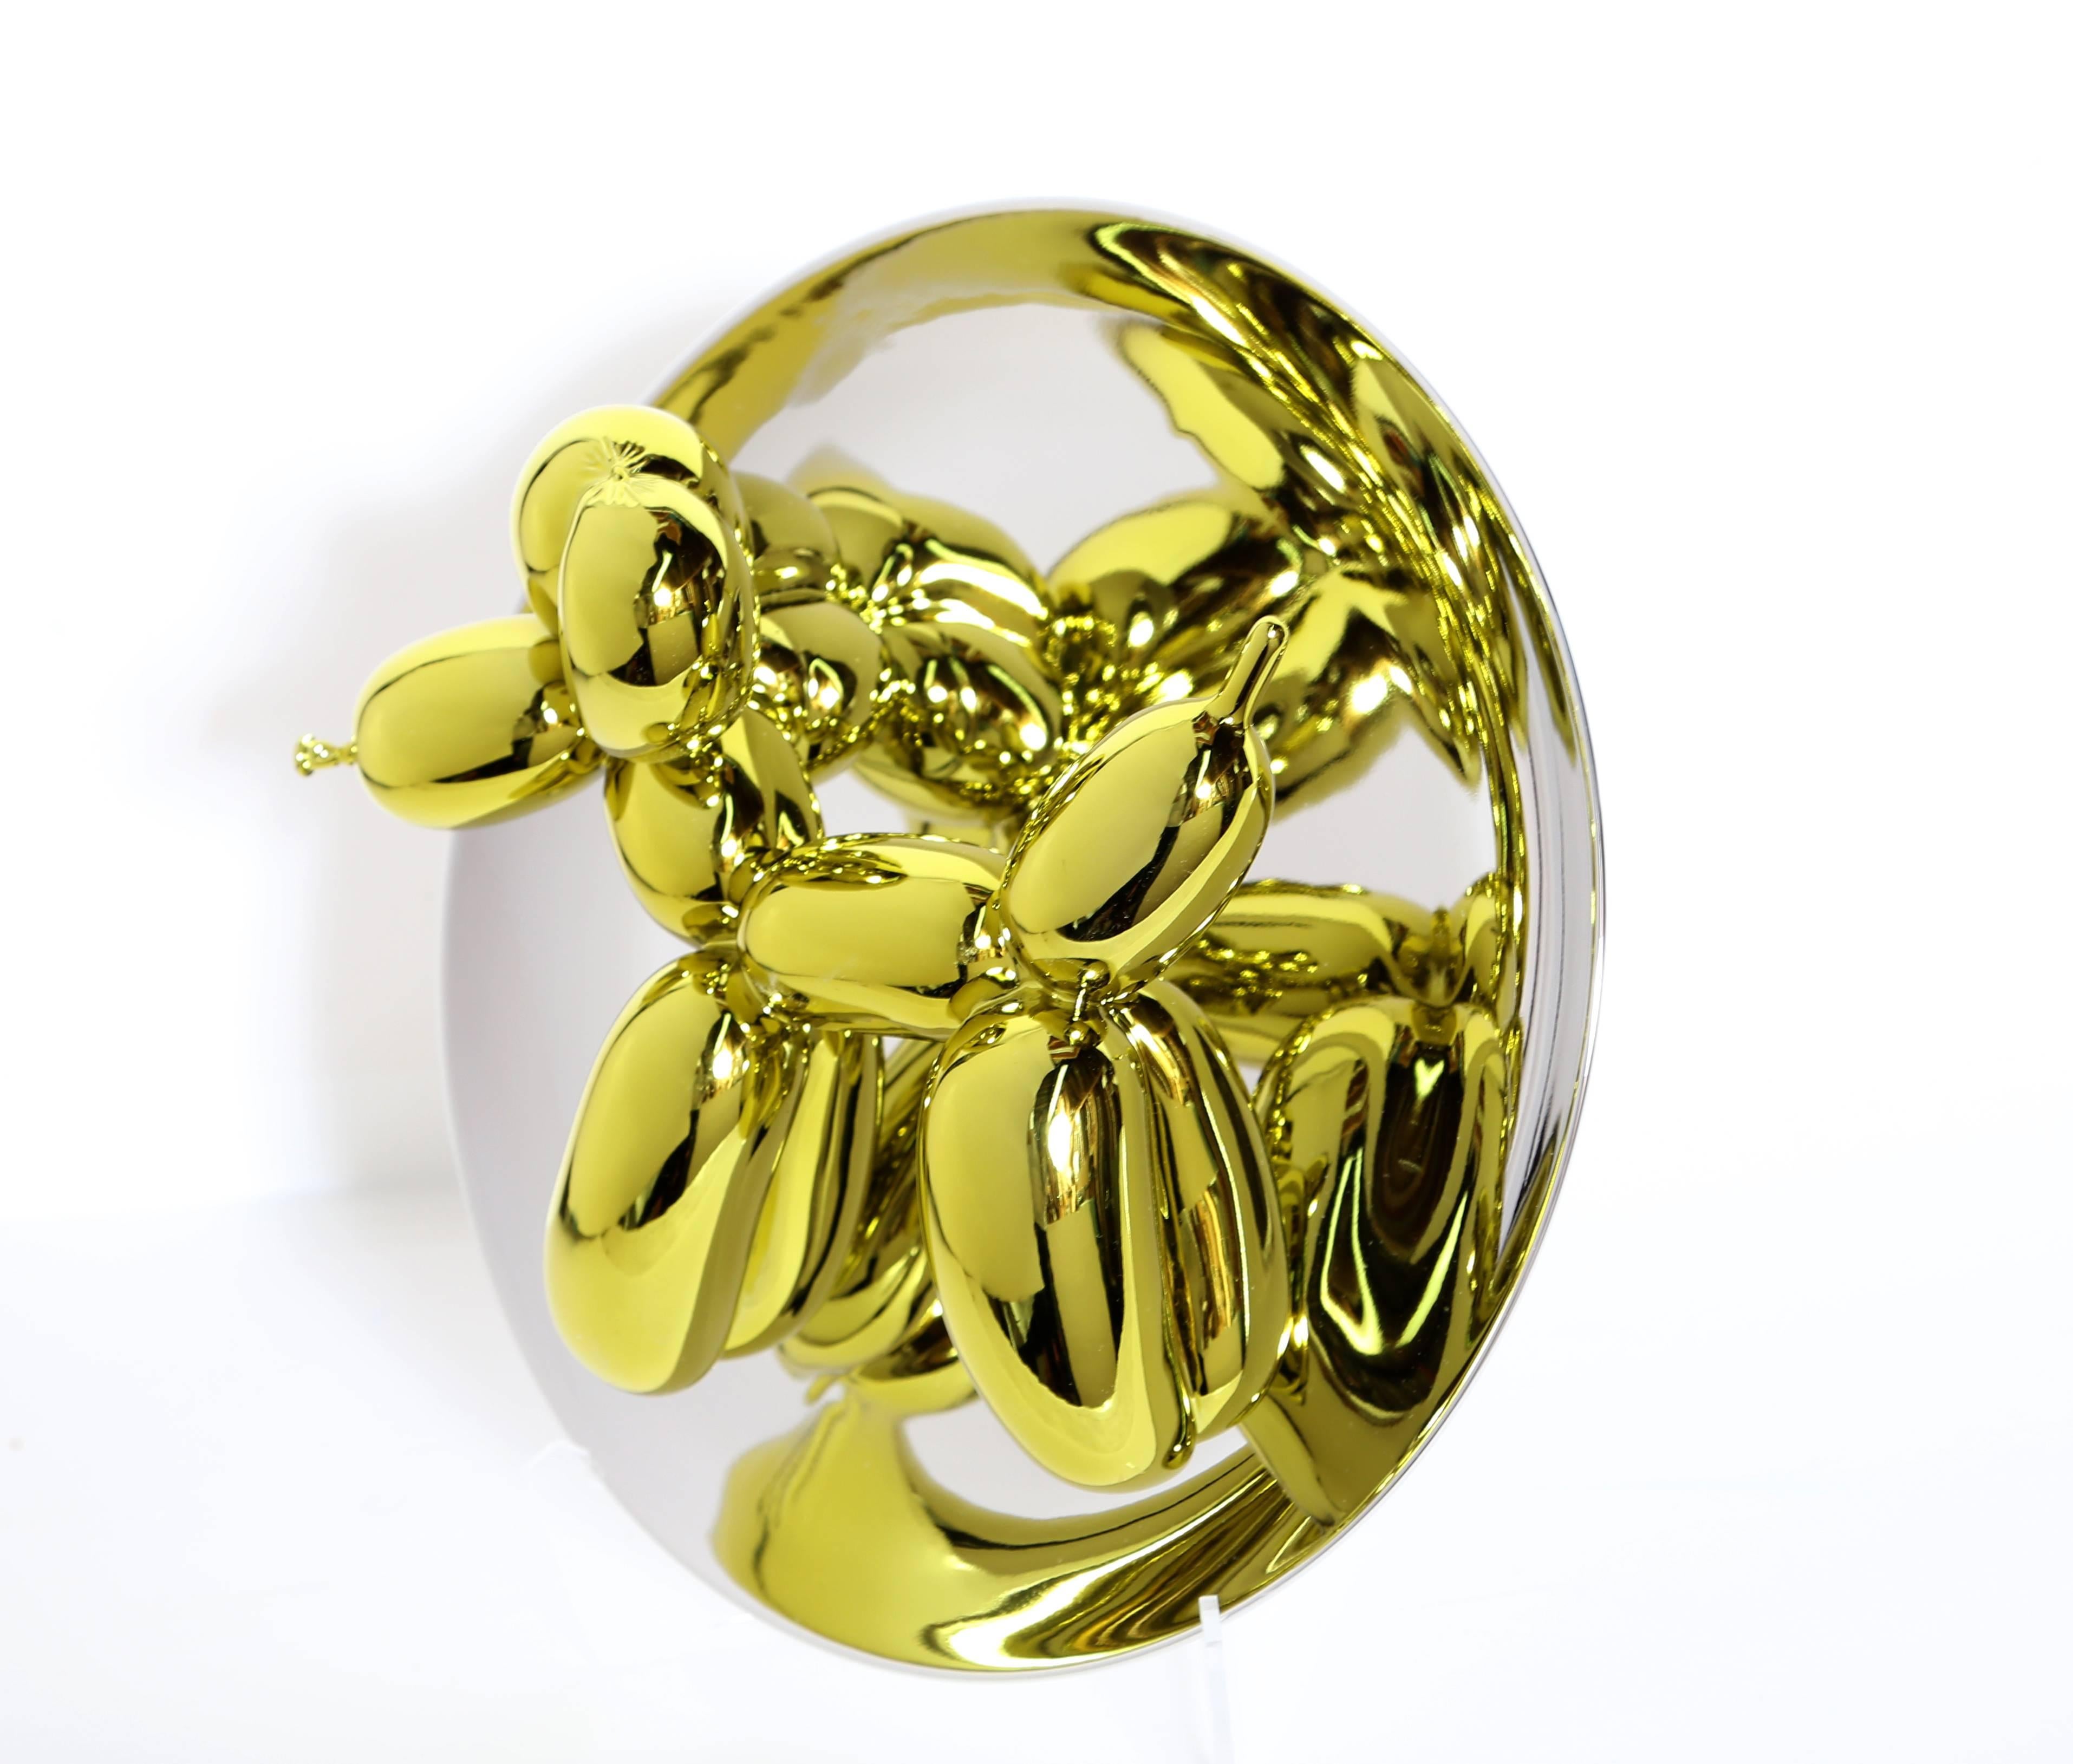 Artist: Jeff Koons, American (1954 - )
Title: Balloon Dog (Yellow)
Year: 2015
Medium: Porcelain with Mirror Finish, signed and numbered verso
Edition: 2300
Size: 10.5 x 10.5 x 5 in. (26.67 x 26.67 x 12.7 cm)
Includes all original packaging.